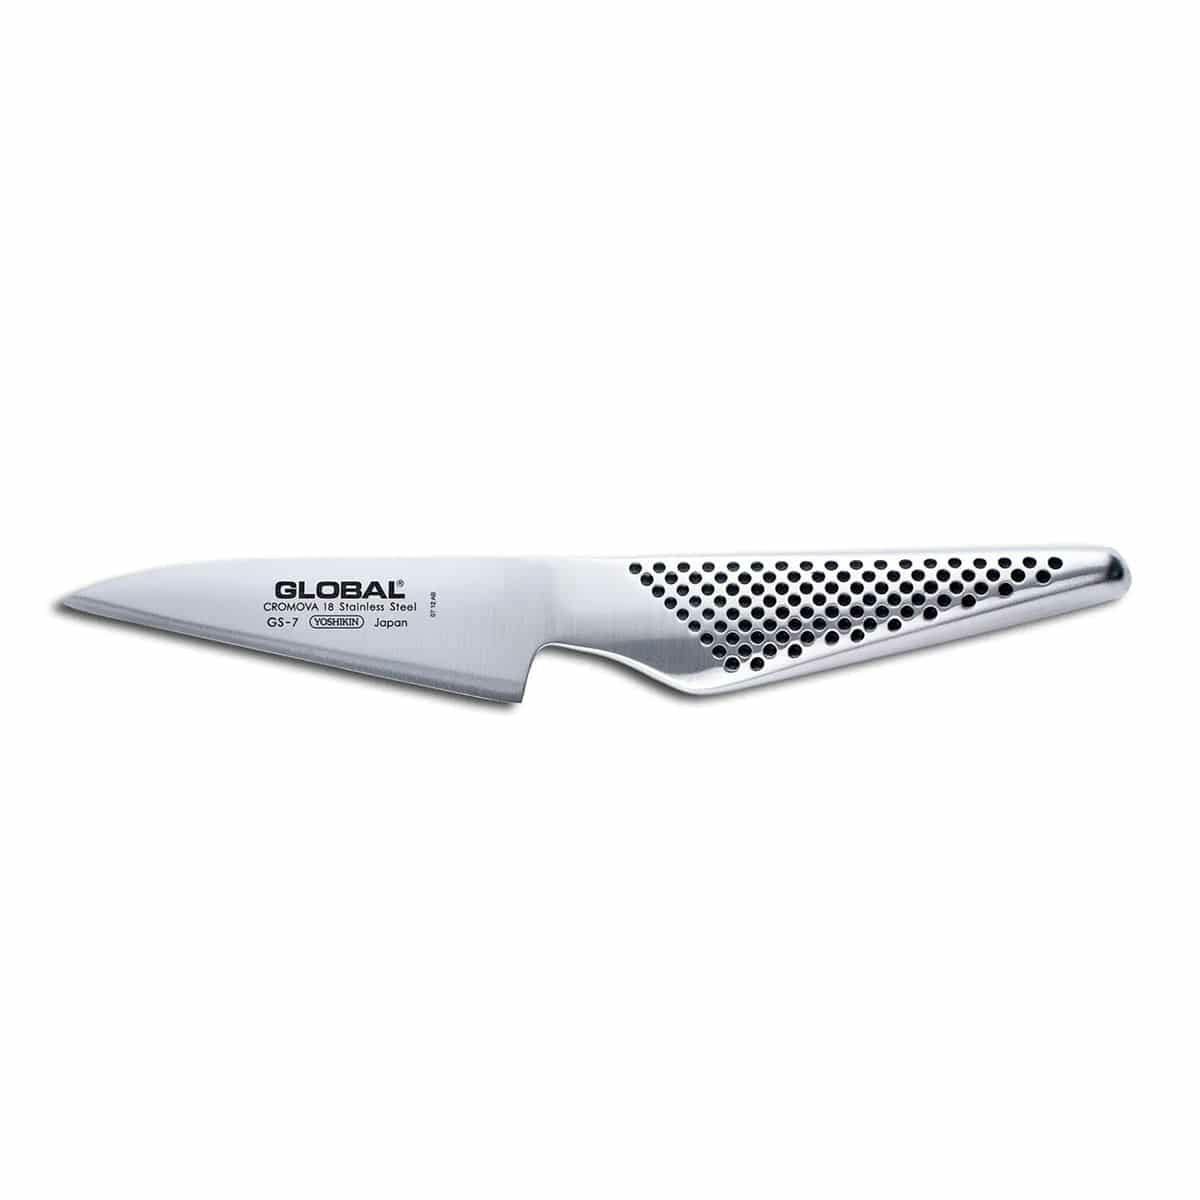 Global GS Paring Knife, 3.5"